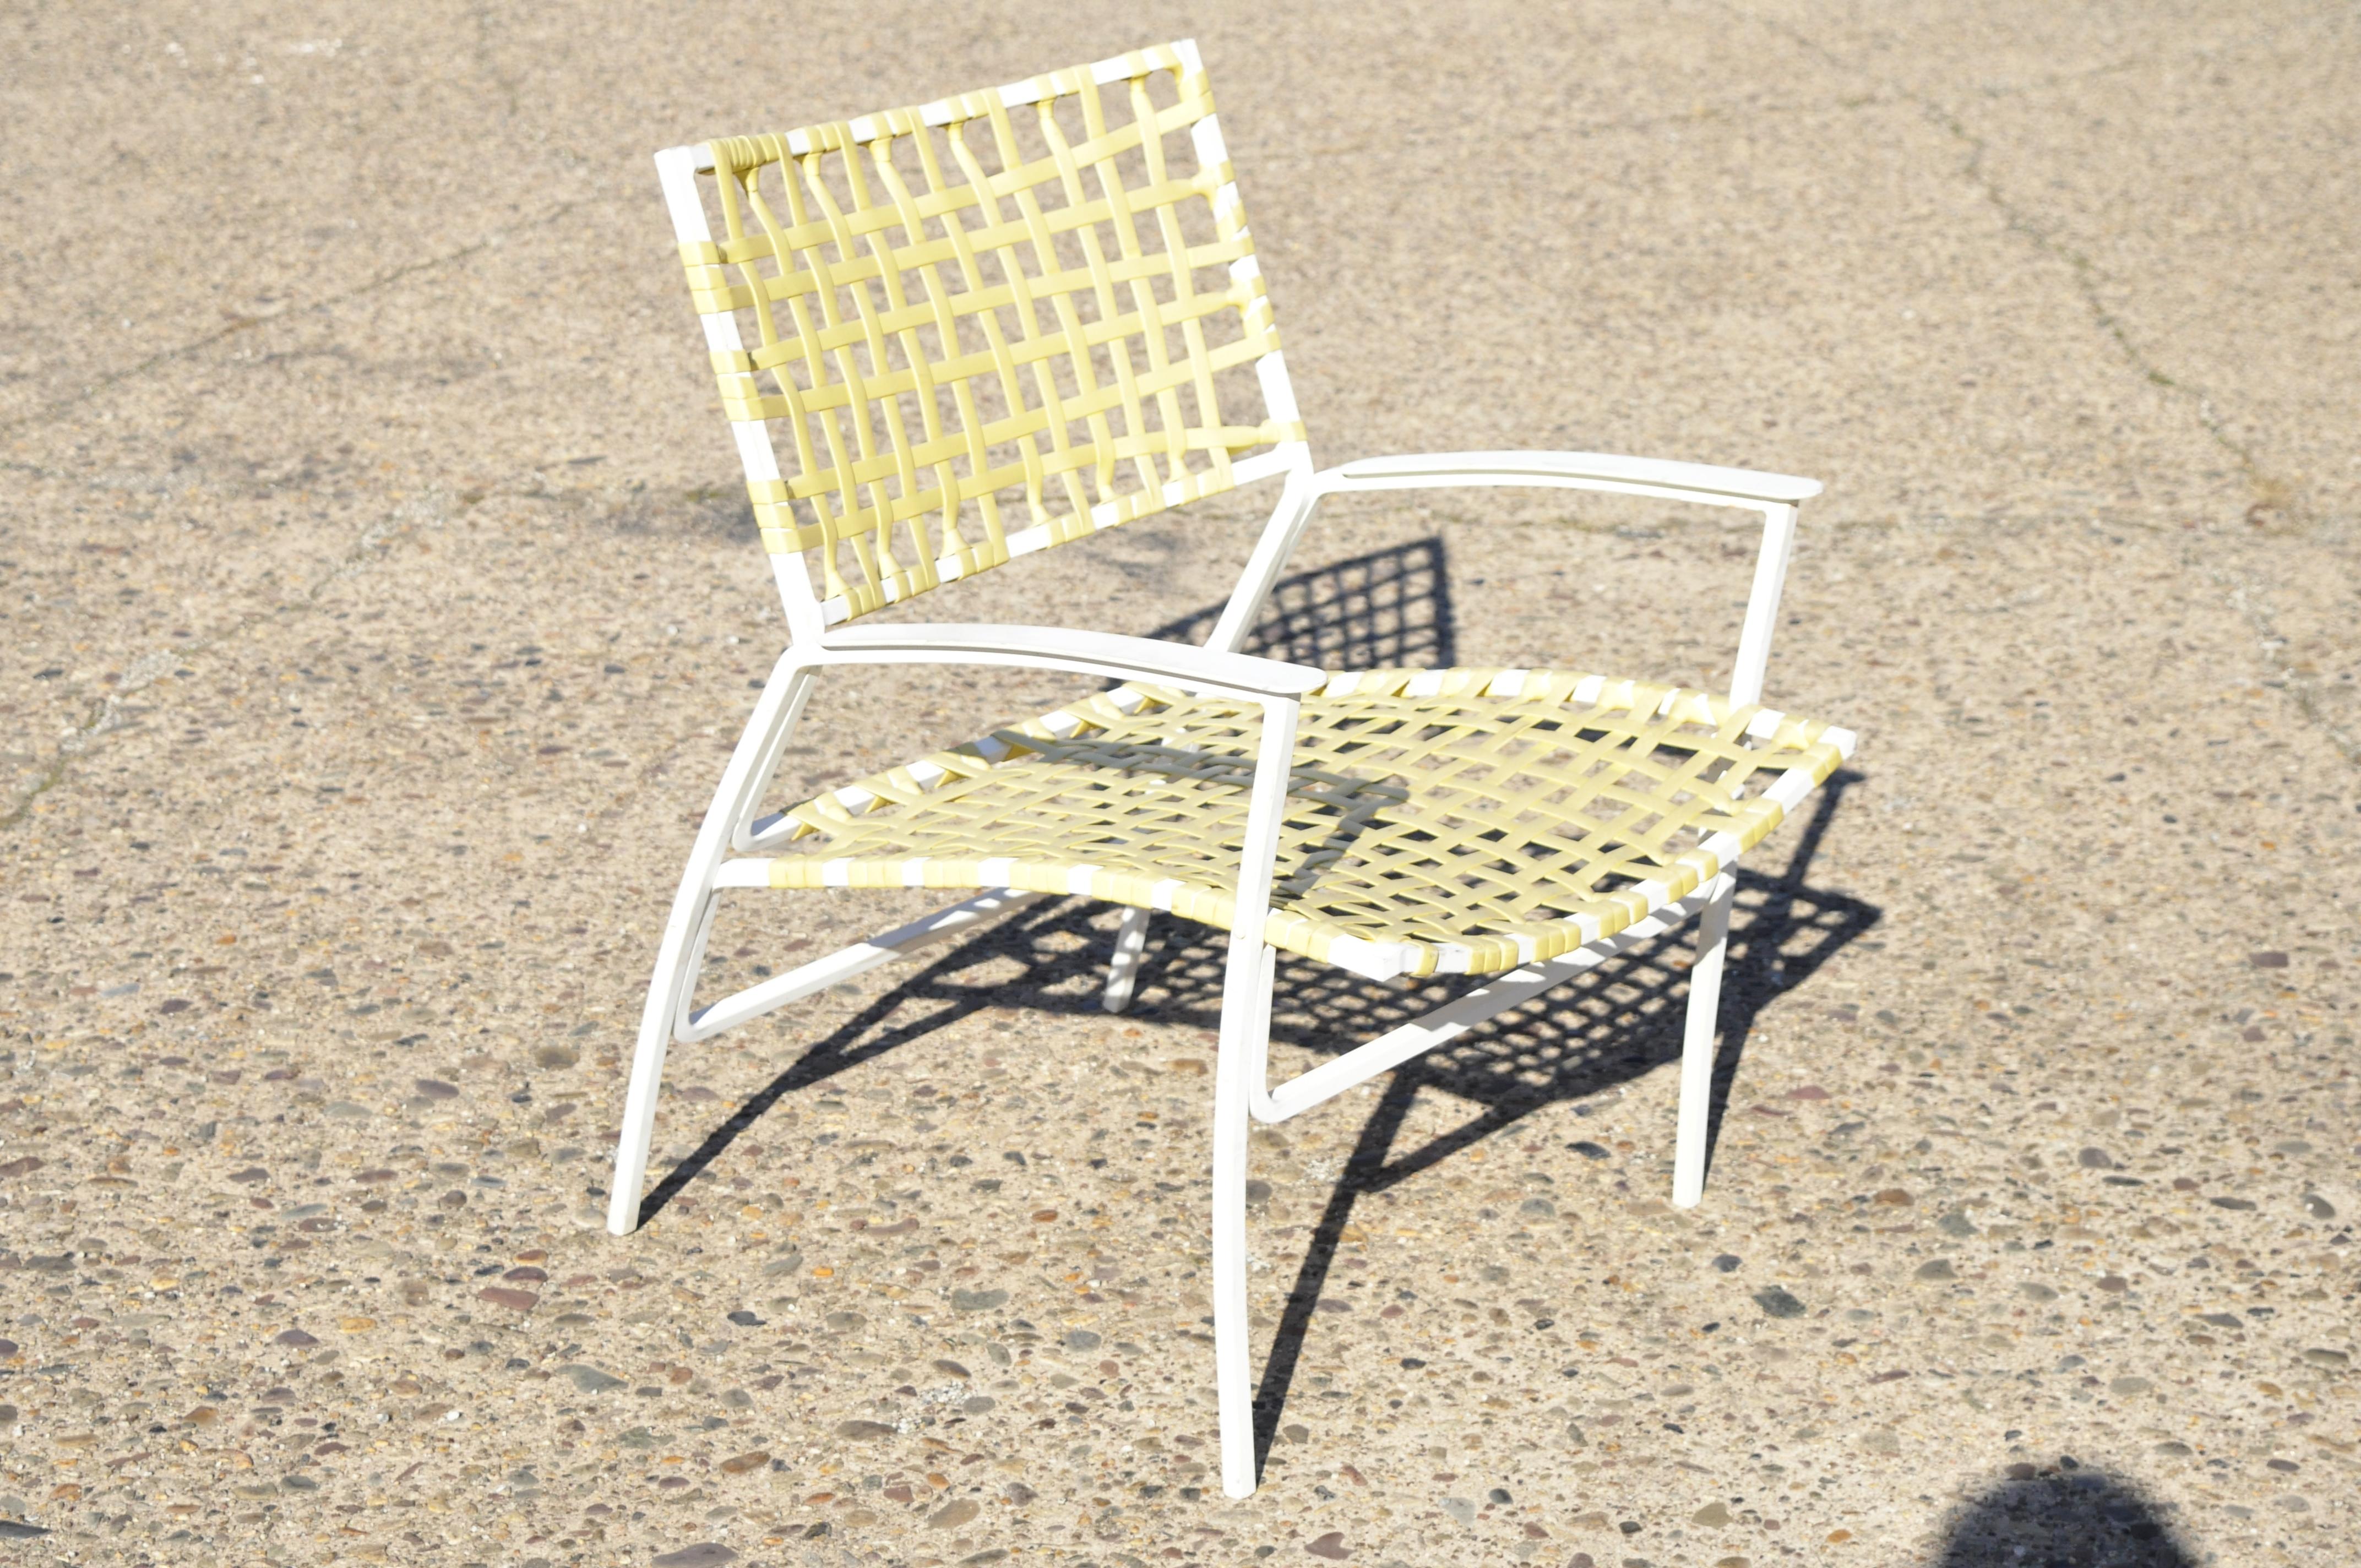 Medallion Mid-Century Modern aluminum yellow woven vinyl strap patio POOL lounge chair and ottoman. Item features yellow woven vinyl strap seat and back, white cast aluminum frames, clean modernist lines, sleek sculptural form. (1) Lounge arm chair,